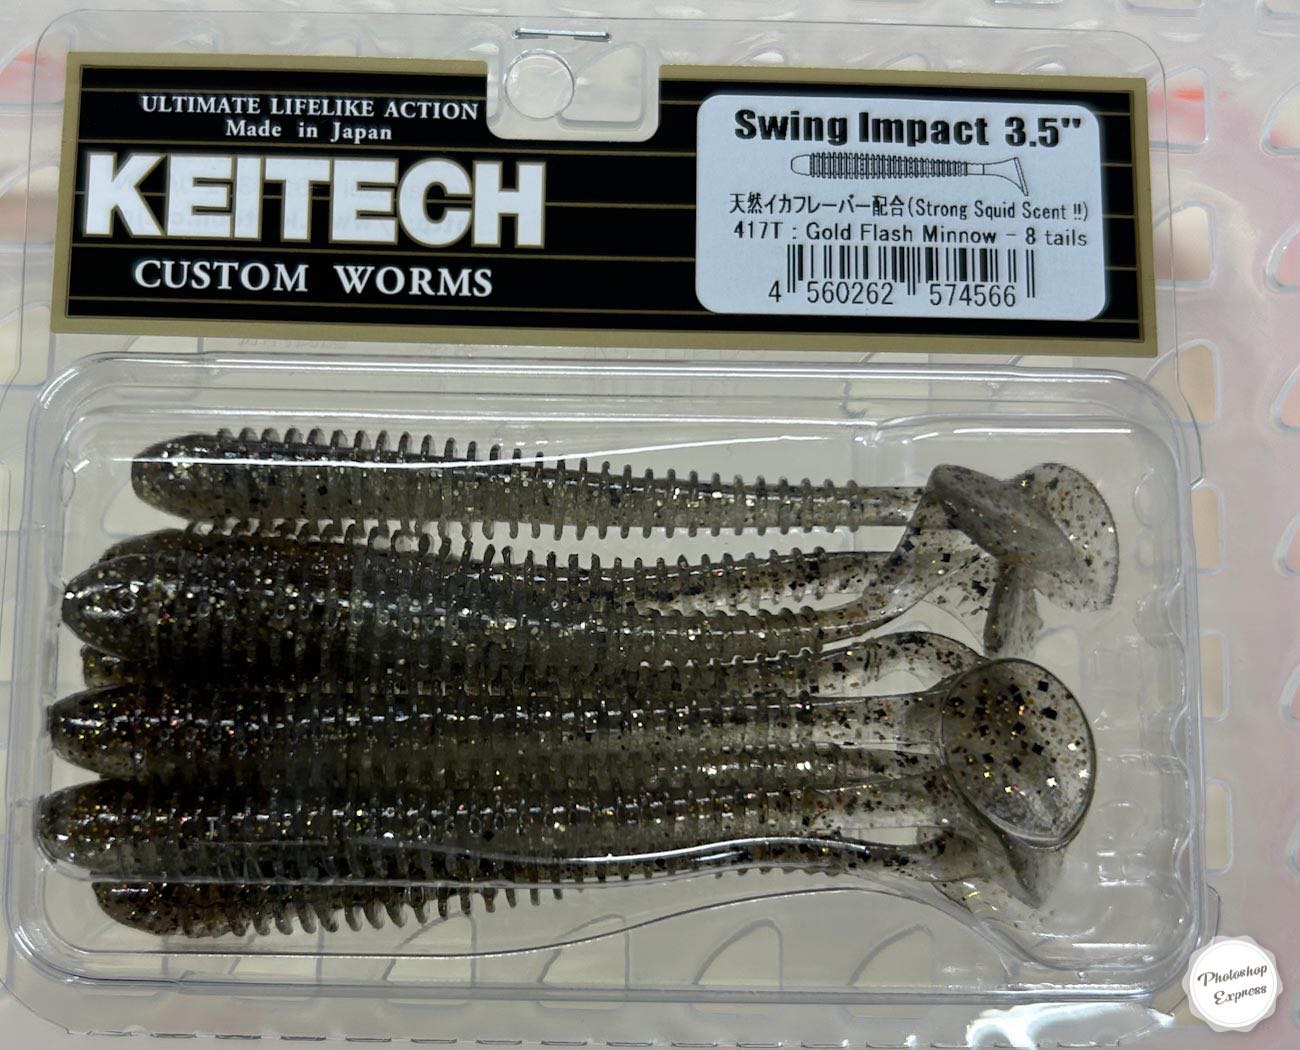 SWING IMPACT 3.5inch 417:Gold Flash Minnow - Click Image to Close